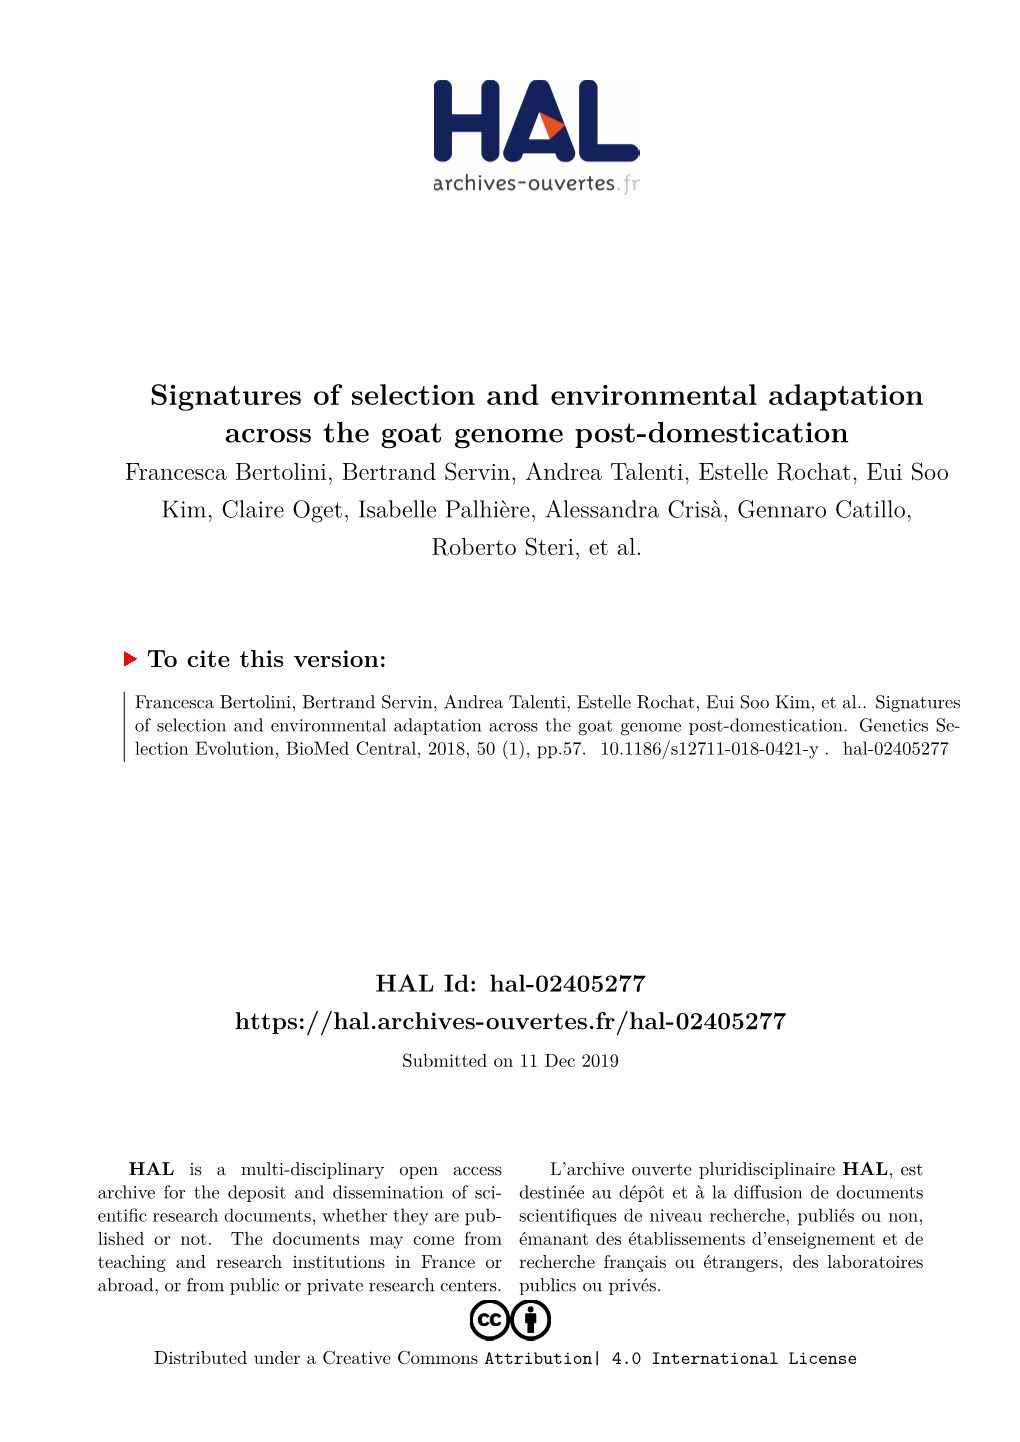 Signatures of Selection and Environmental Adaptation Across